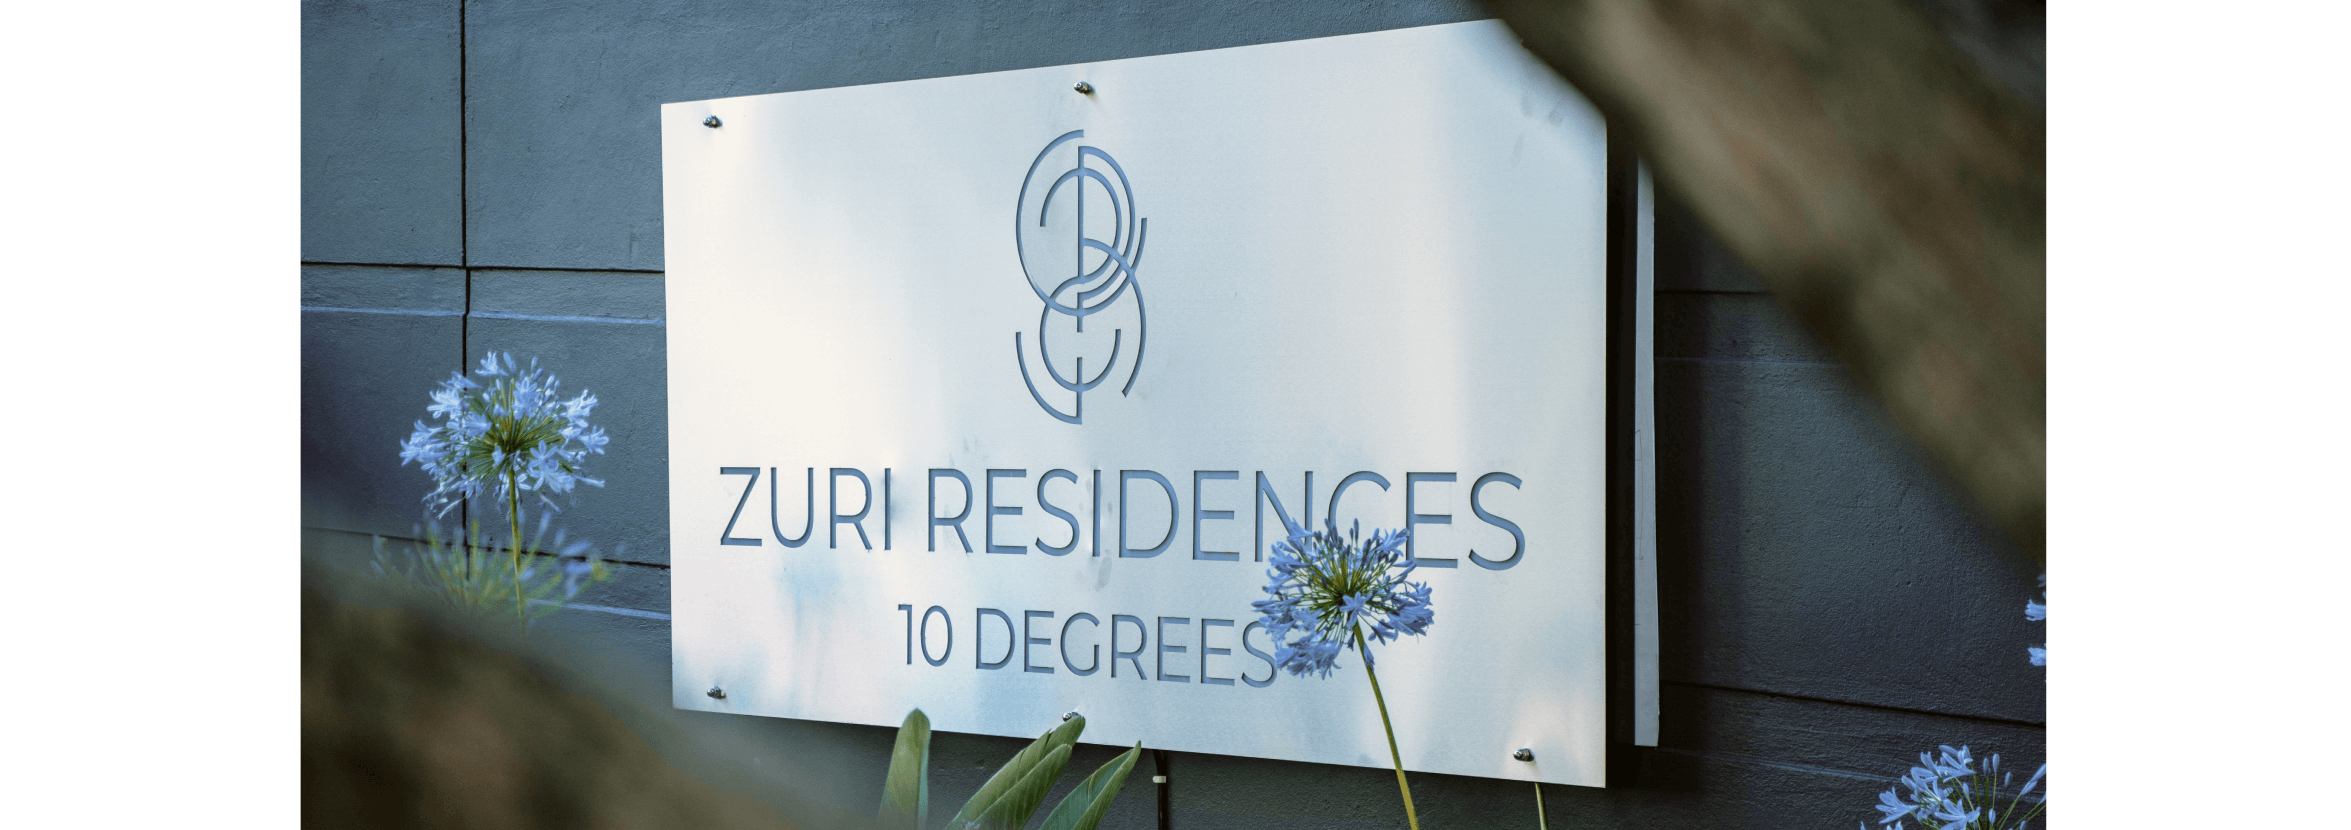 A sign with agapanthus flowers in front of it showing the words Zuri Residences, 10 degrees.